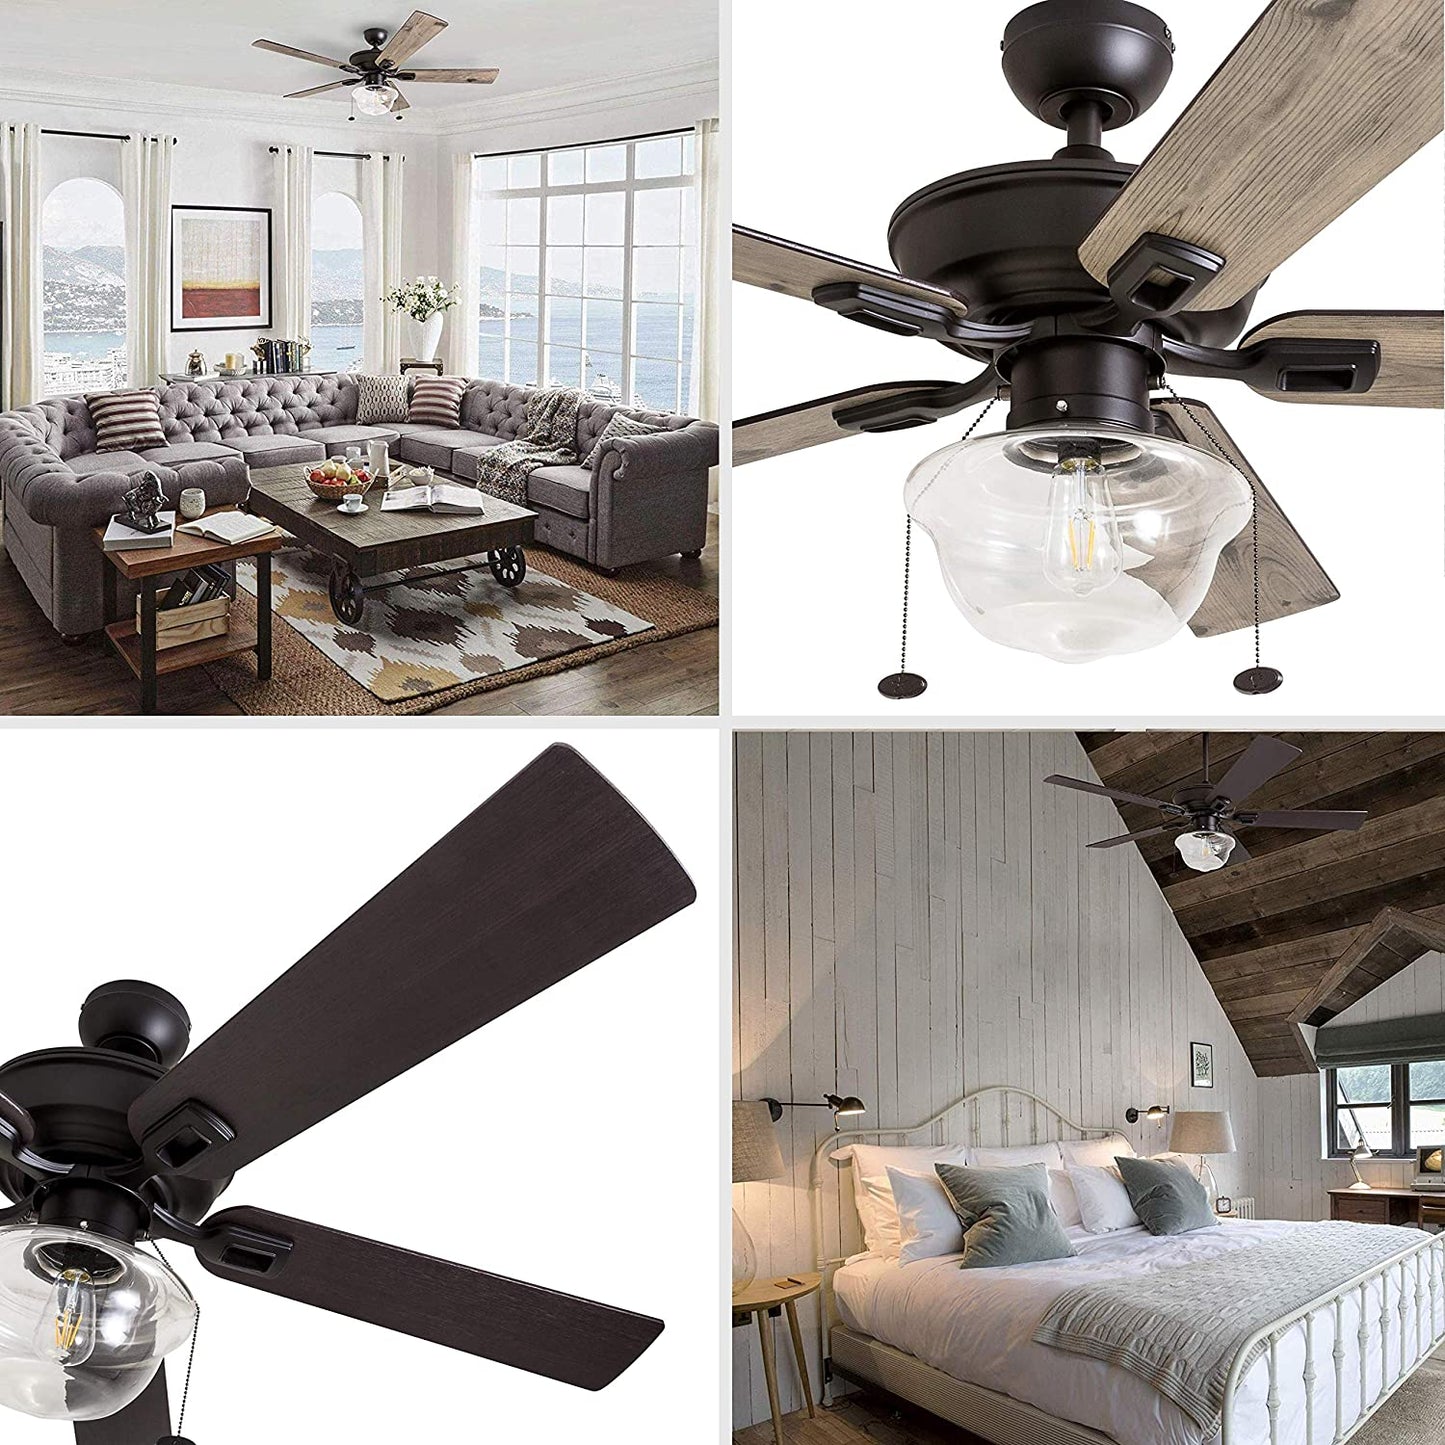 Prominence Home 80091-01 Abner Indoor/Outdoor Ceiling Fan, 52" LED Schoolhouse Edison Bulb, Bronze